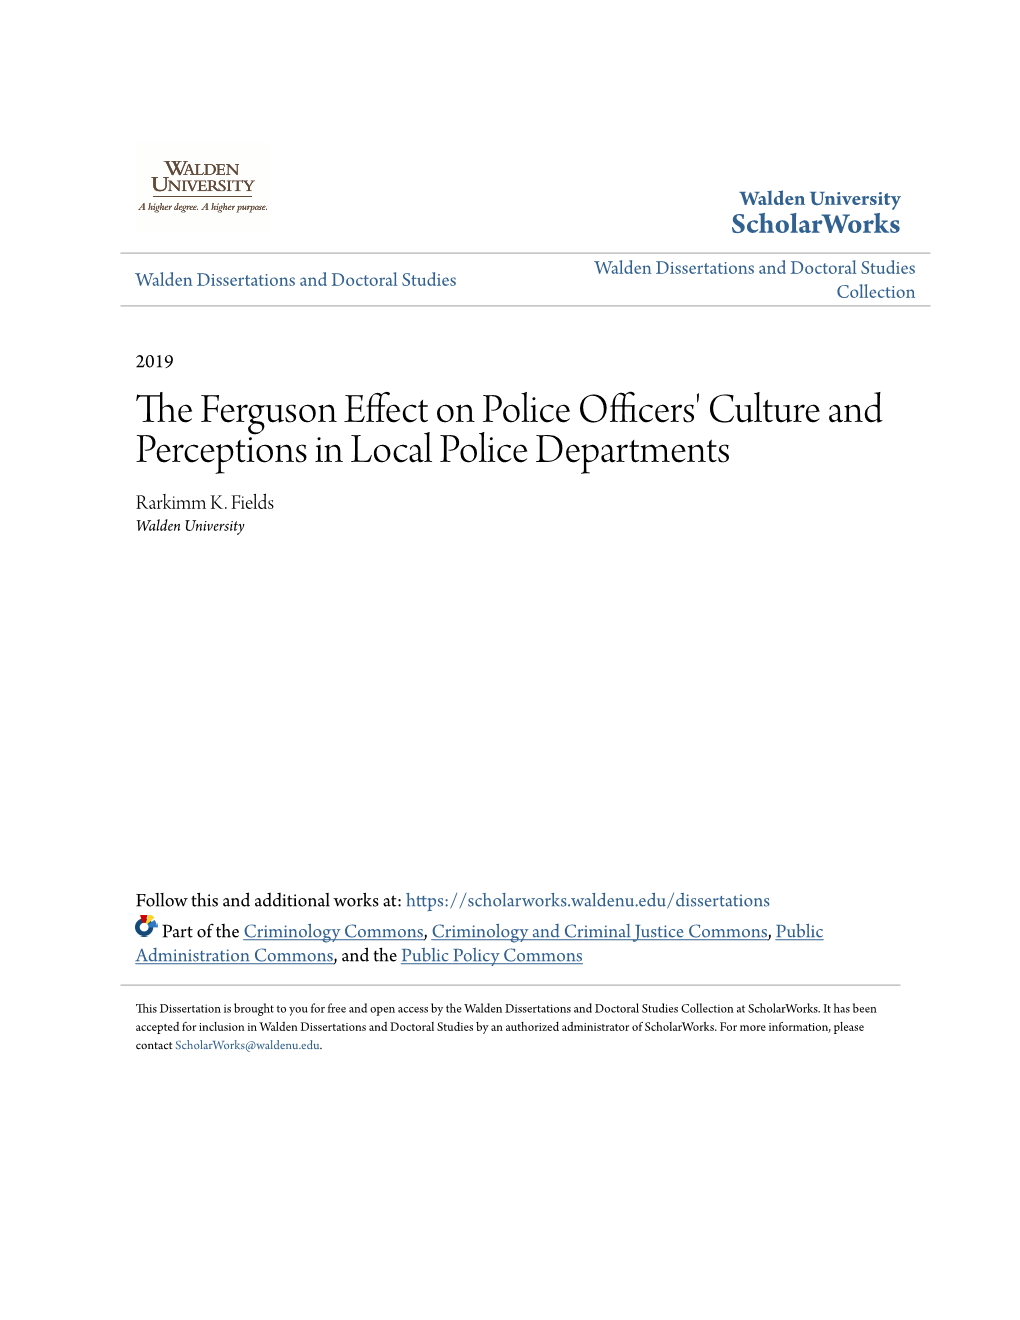 The Ferguson Effect on Police Officers' Culture and Perceptions in Local